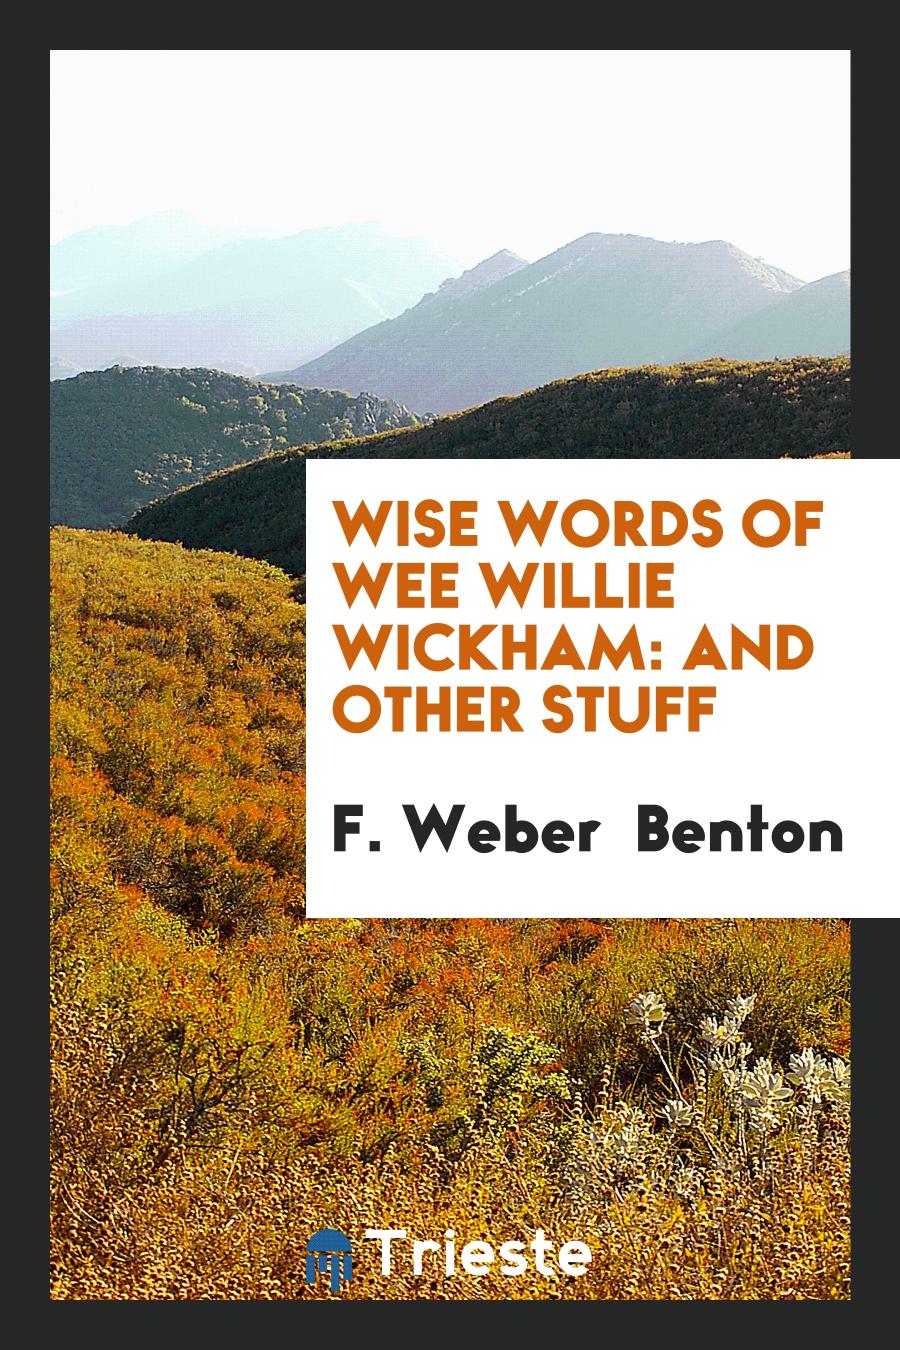 Wise Words of Wee Willie Wickham: And Other Stuff